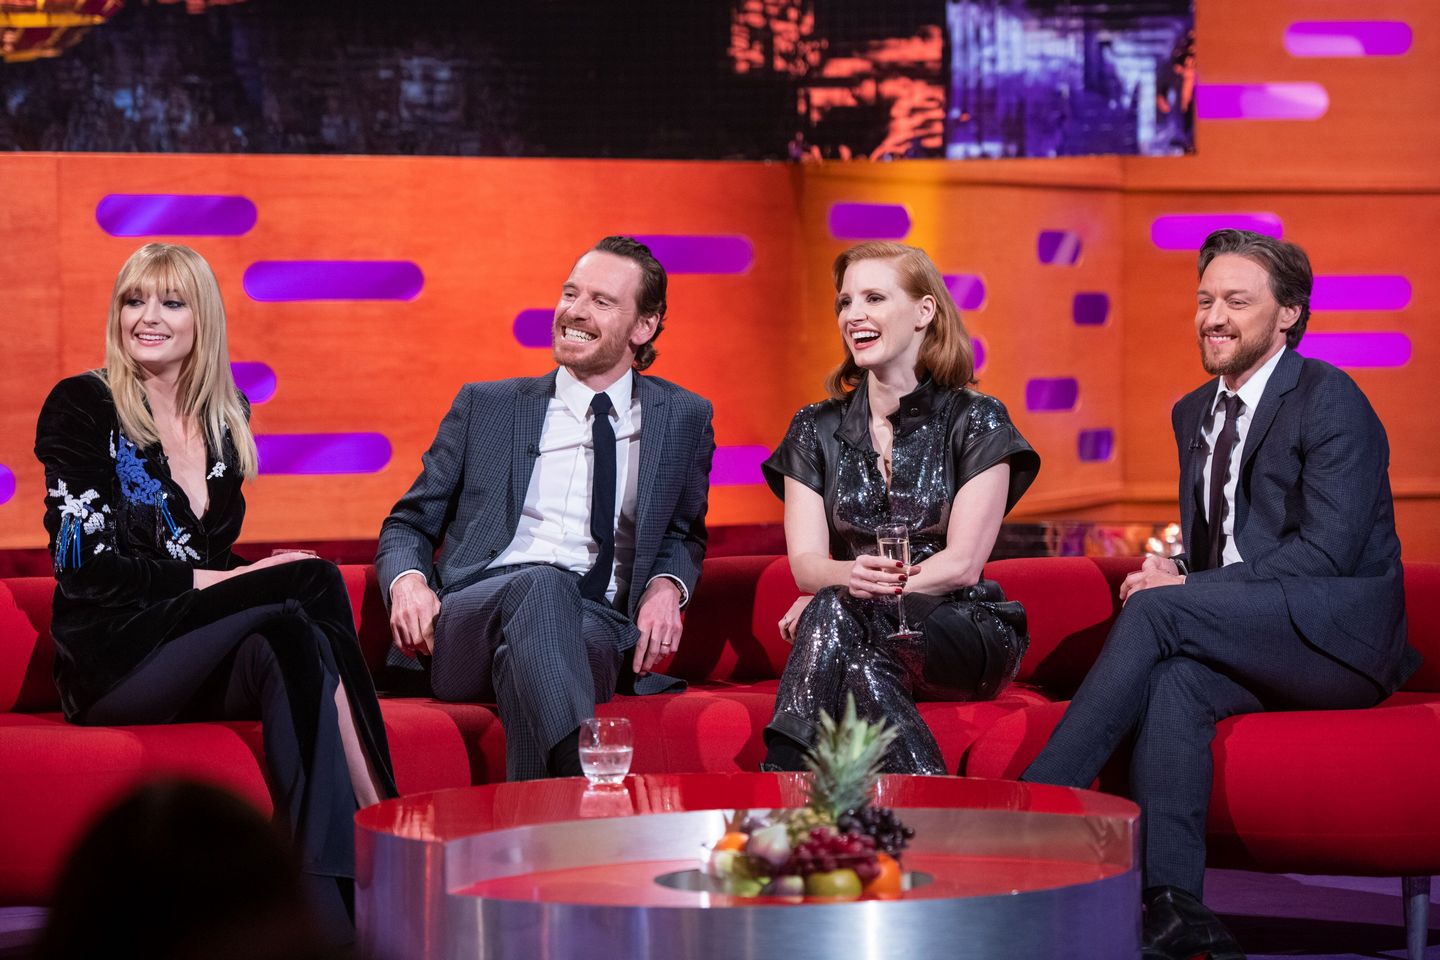 Jessica Chastain and Taylor Swift with X Men crew at The Graham Norton Show